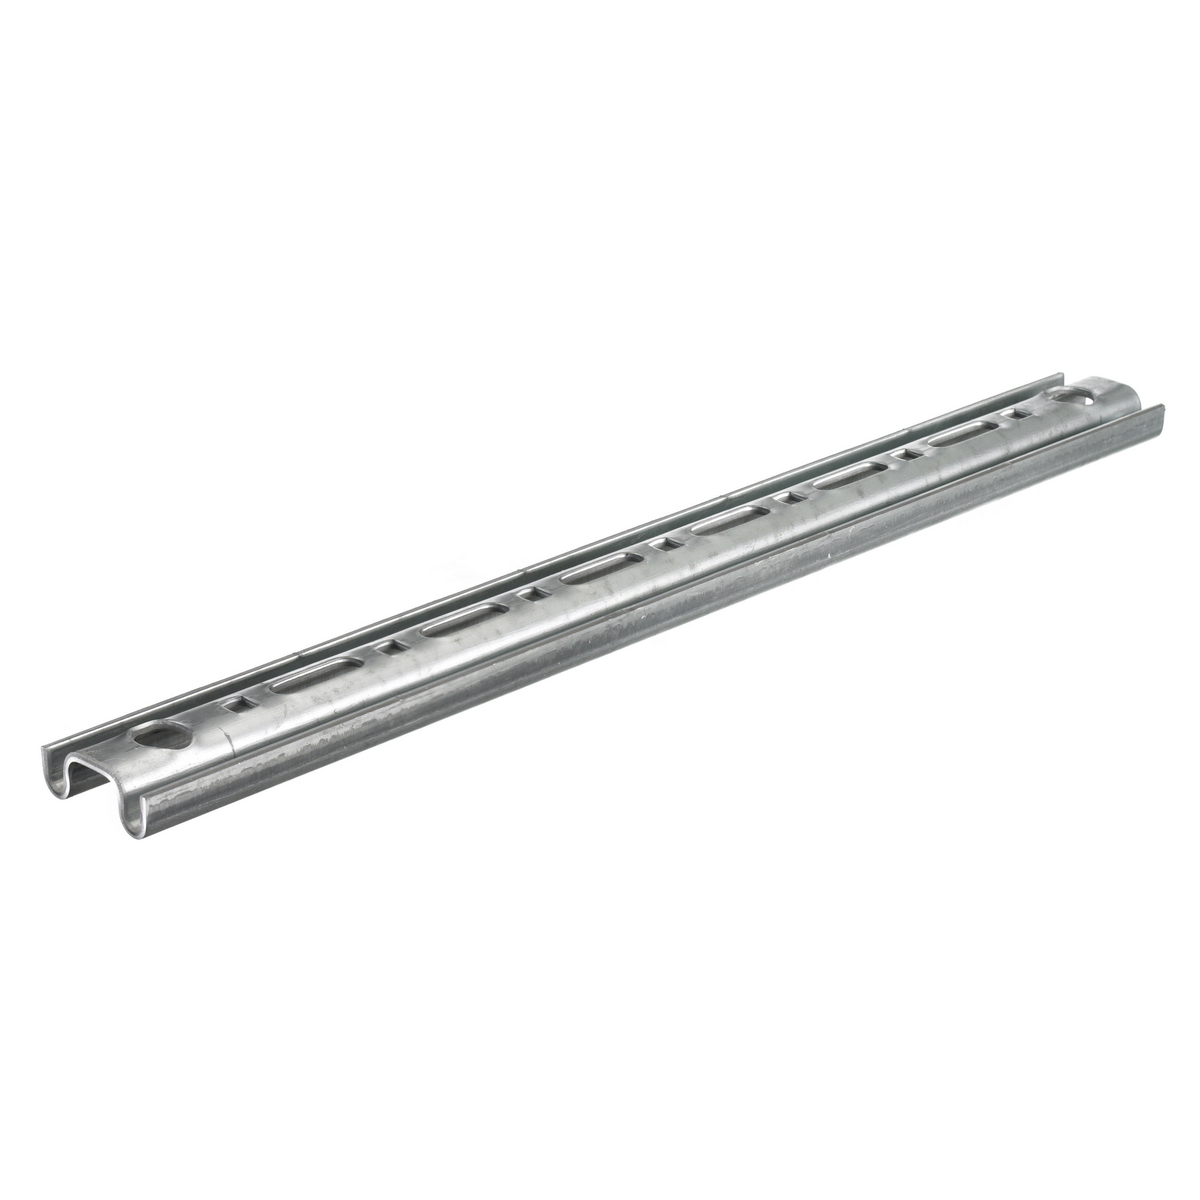 WB,ACCS,CEILINGSUPPORT,12"TRAY,PREGALV